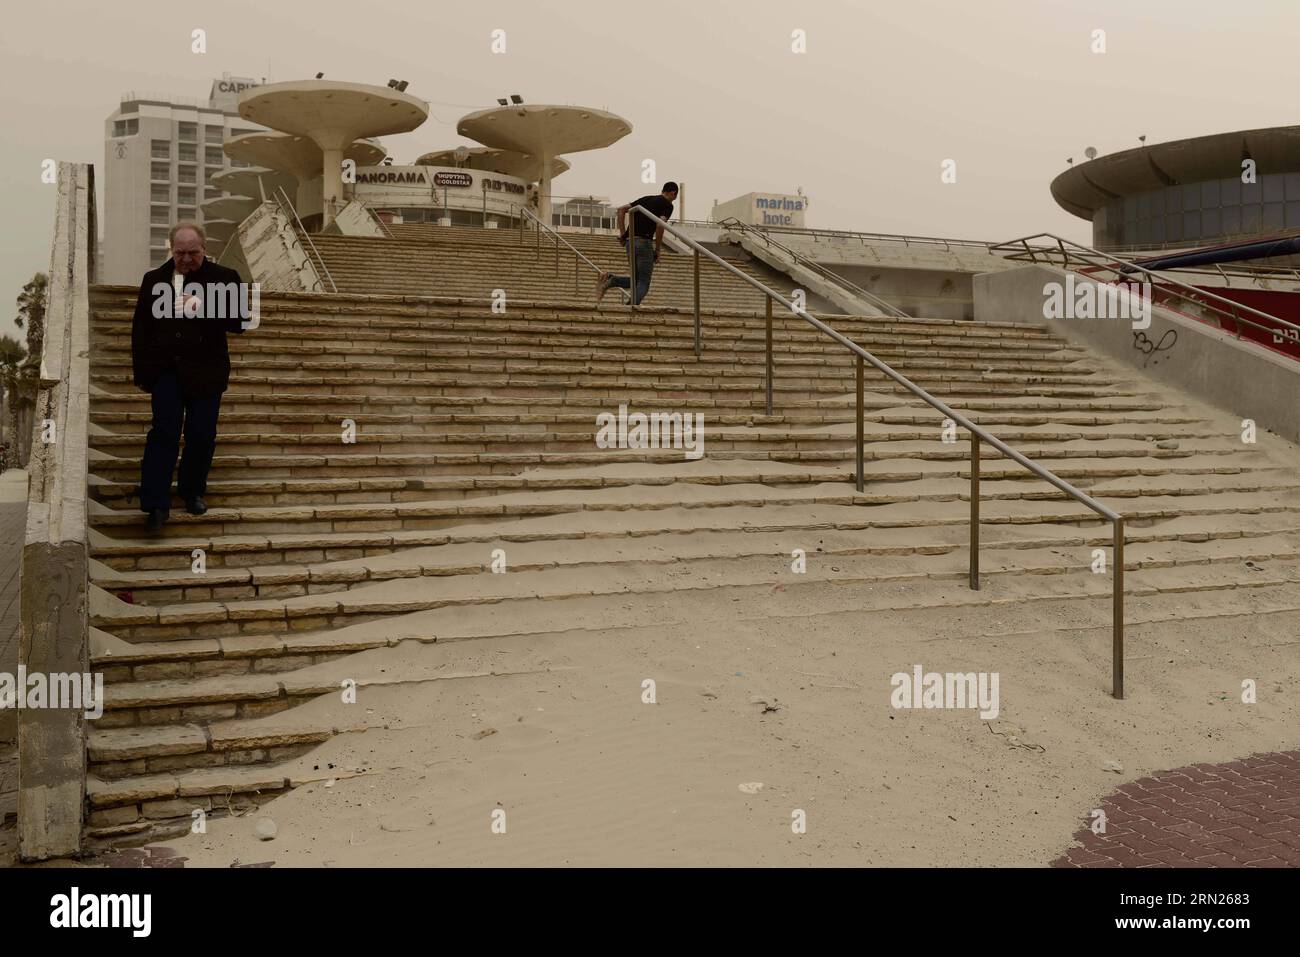 (150212) -- TEL AVIV,  Sands are blown to the seaside stairs in Tel Aviv, Israel, on Feb. 11, 2015. A sandstorm continues to blow hard in parts of the Middle East on Wednesday, where authorities have remained sea ports closed and briefly grounded flights. Israel has been hit by the developing sandstorm. The country temporarily shut down two airports and suspended all domestic flights Wednesday morning as the sandstorm hit the country, the Israel Airport Authority said in a statement. ) ISRAEL-TEL AVIV-STORM JINI/TomerxNeubeg PUBLICATIONxNOTxINxCHN   Tel Aviv Sands are blown to The Seaside Stai Stock Photo